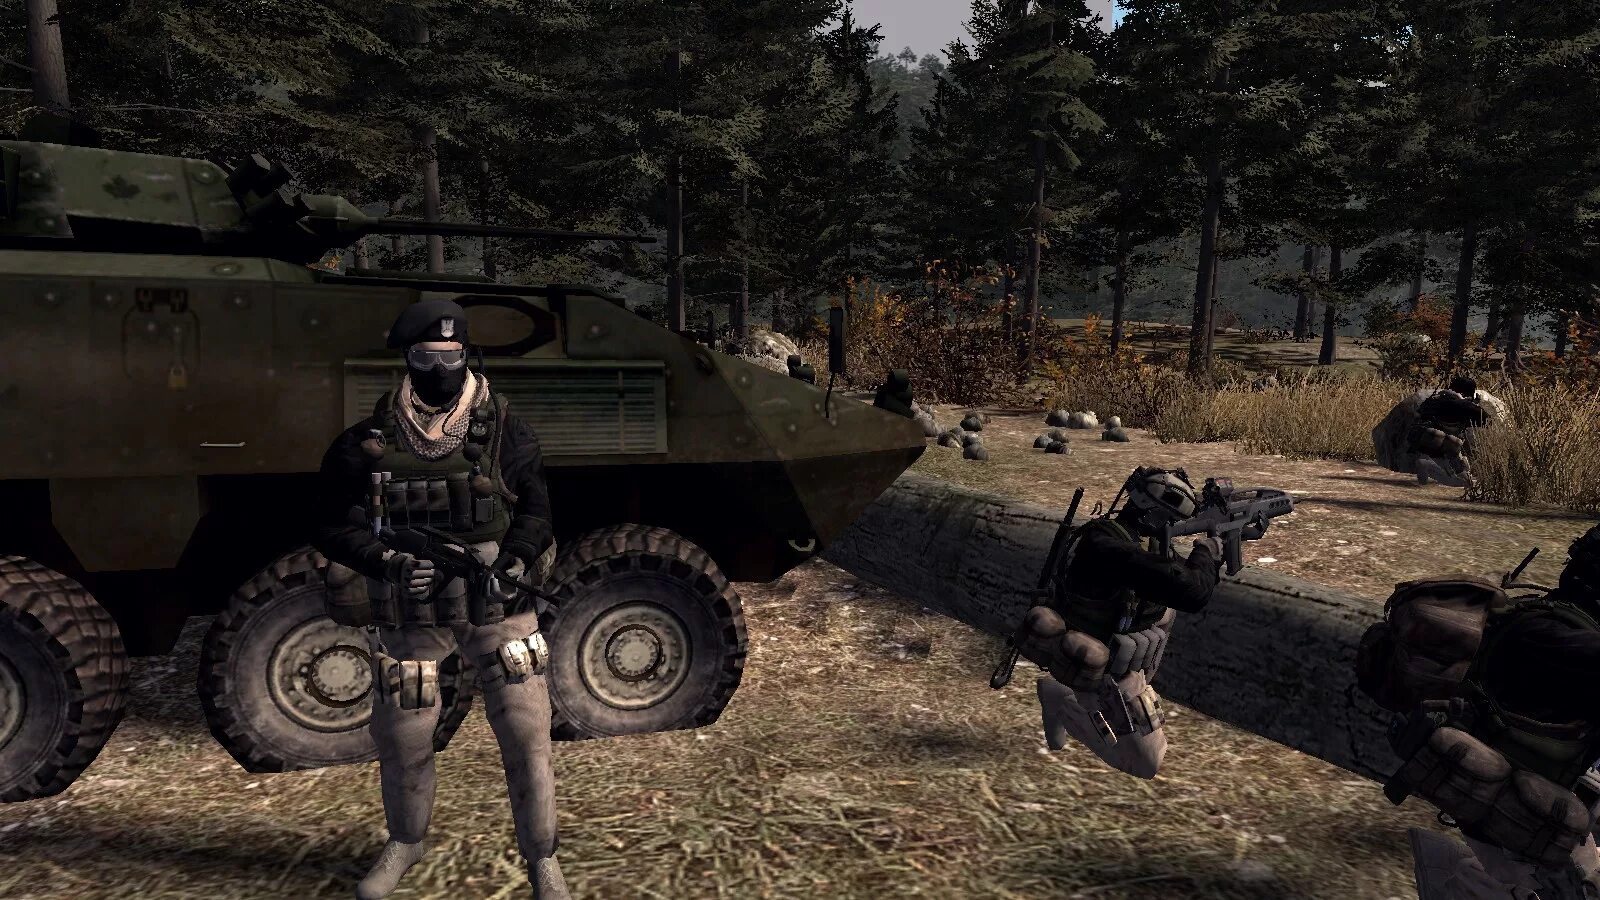 Mod 0 8 8. Call to Arms Assault Squad 2. Red Rising Mod for Assault Squad 2. Red Rising 3.3 Beta.